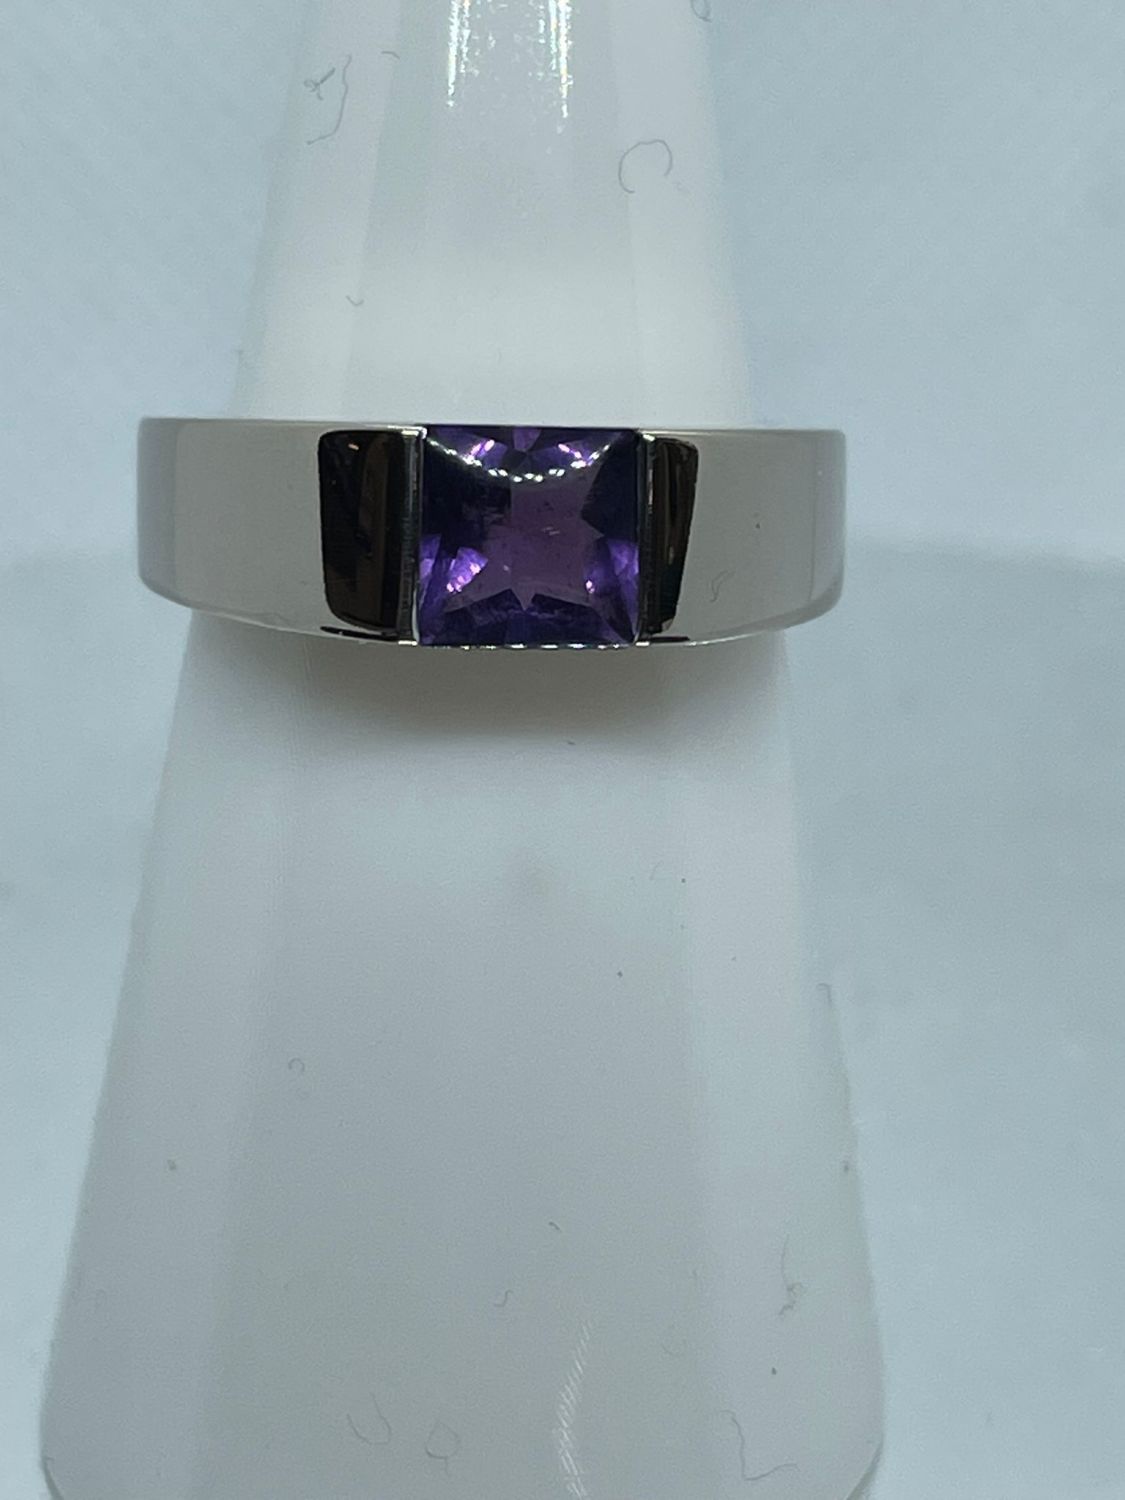 CARTIER - 18K WHITE GOLD / AMETHYST RING WITH BOX & CERTIFICATE - Image 4 of 5